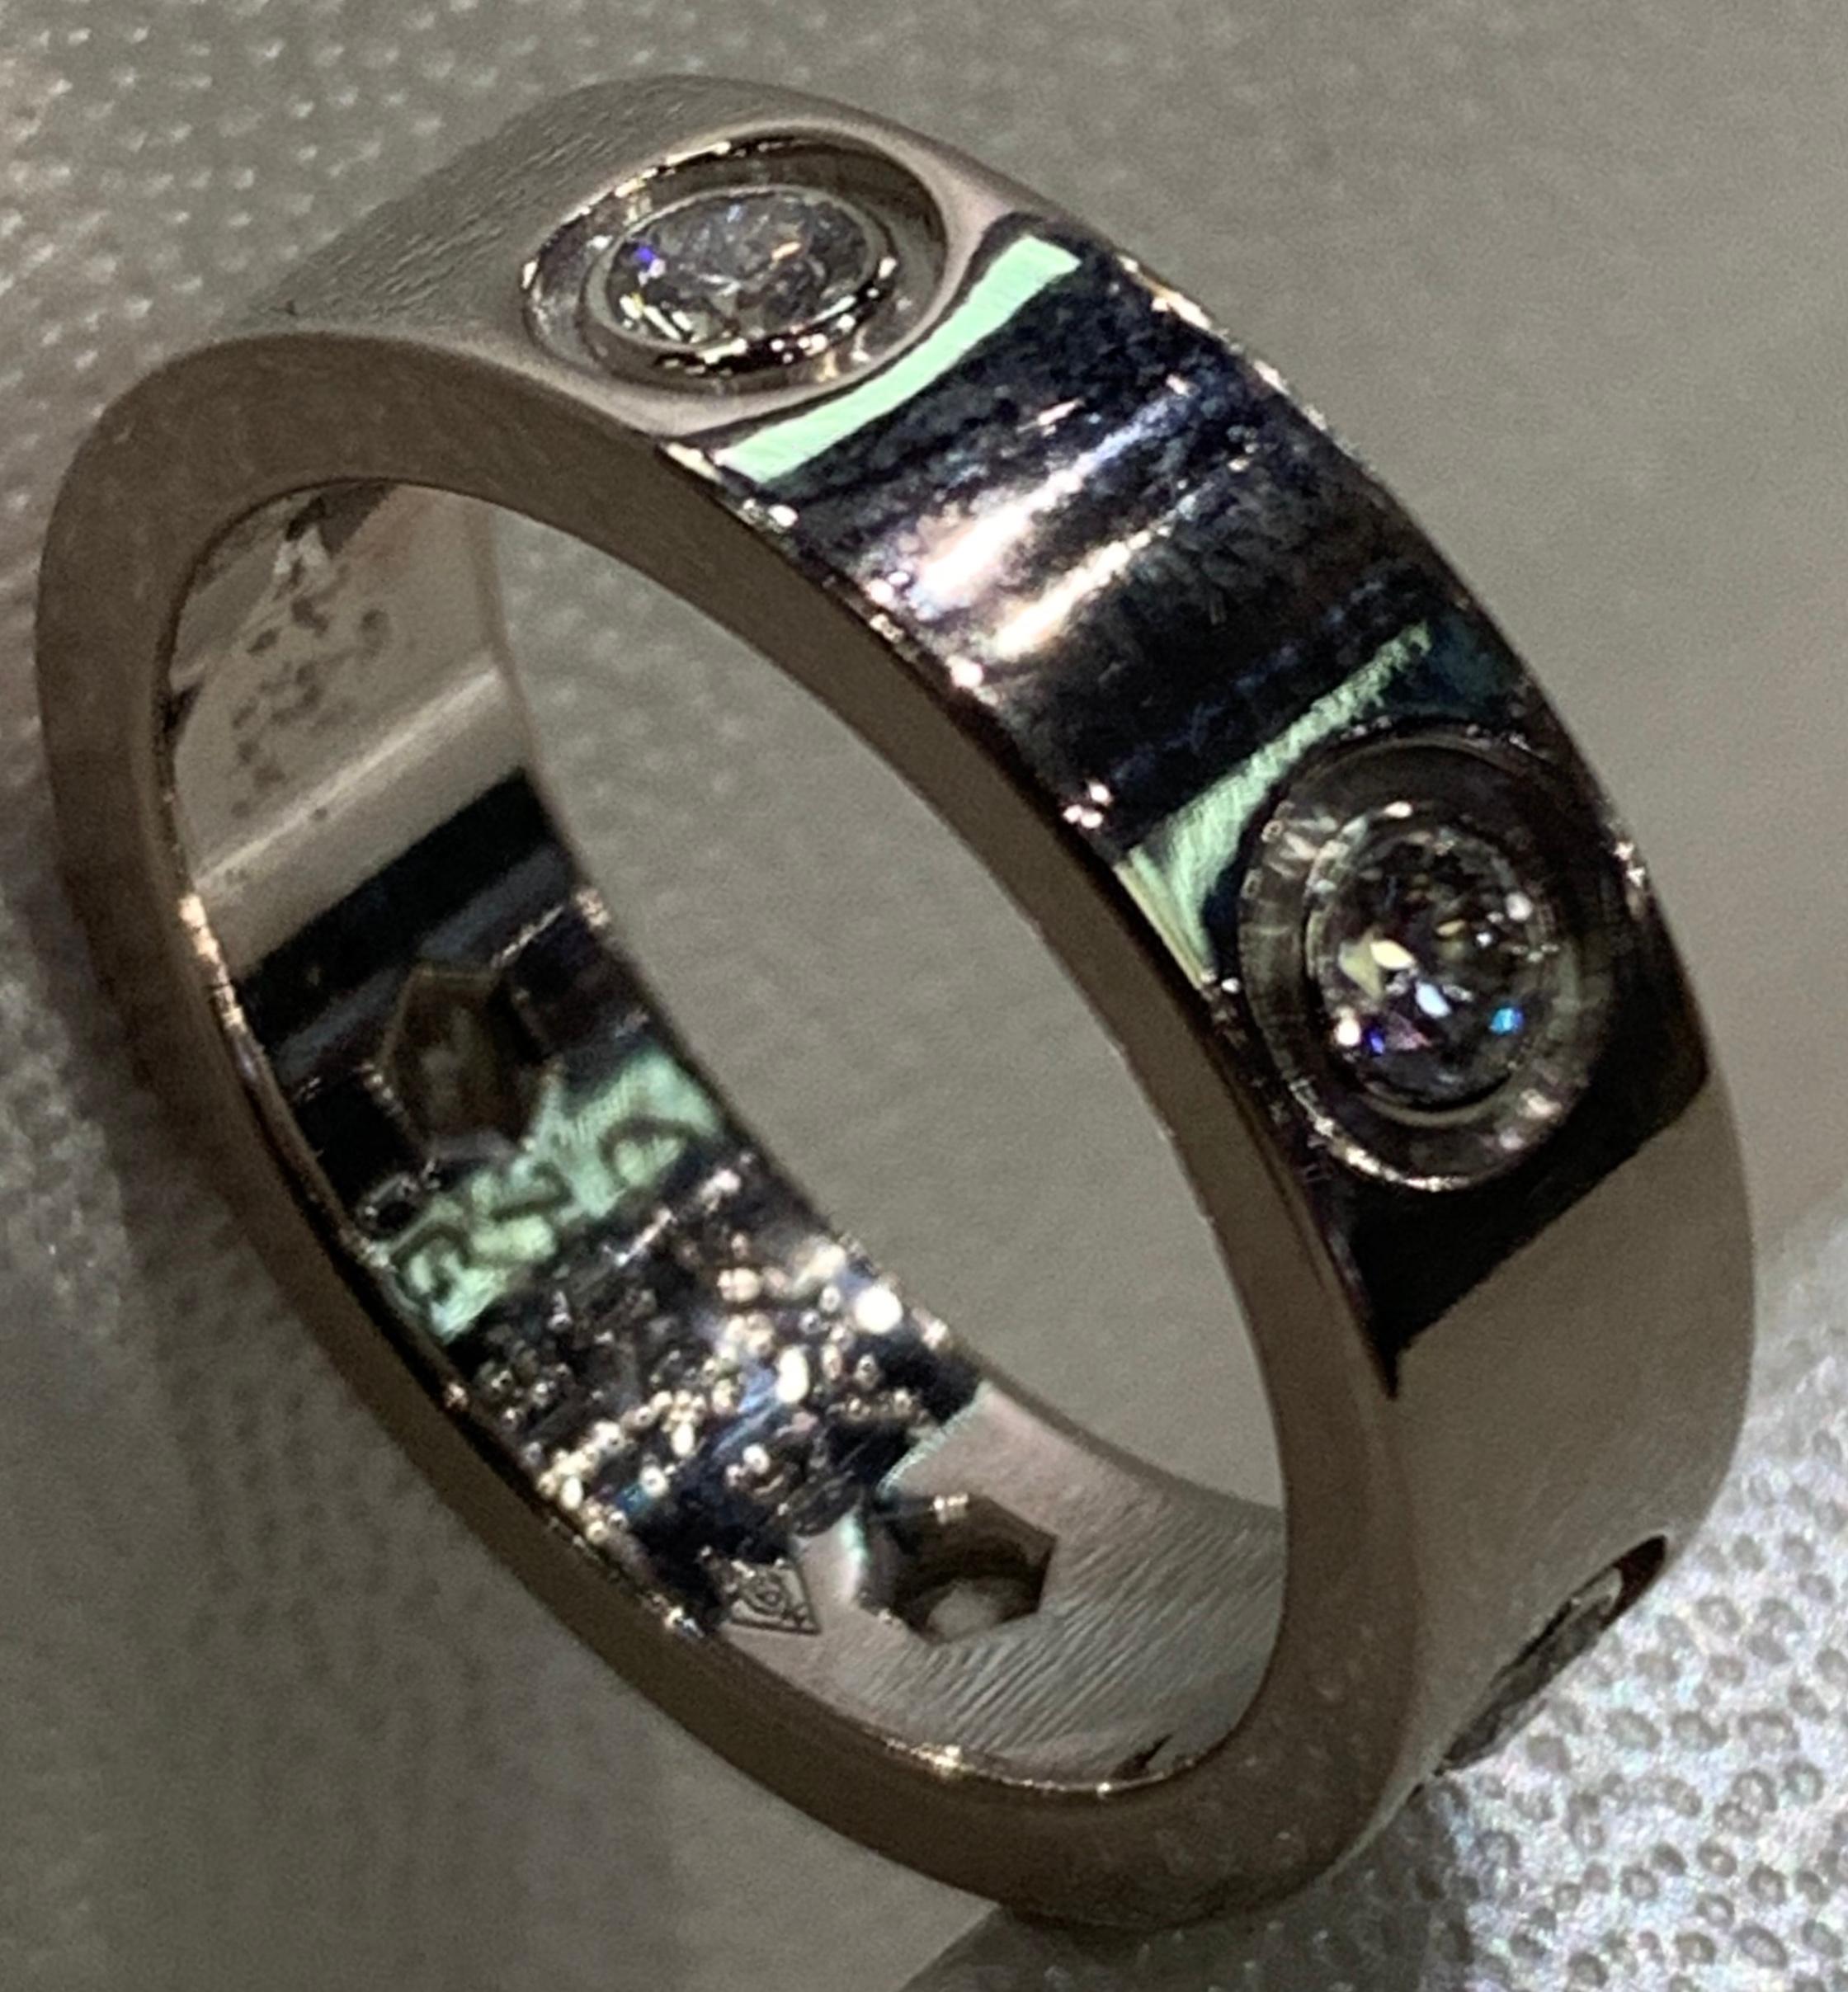 CARTIER 18K white gold LOVE ring, with six faceted diamonds. No longer made with six diamonds. Size 50 (5 1/2).
The ring everyone wants